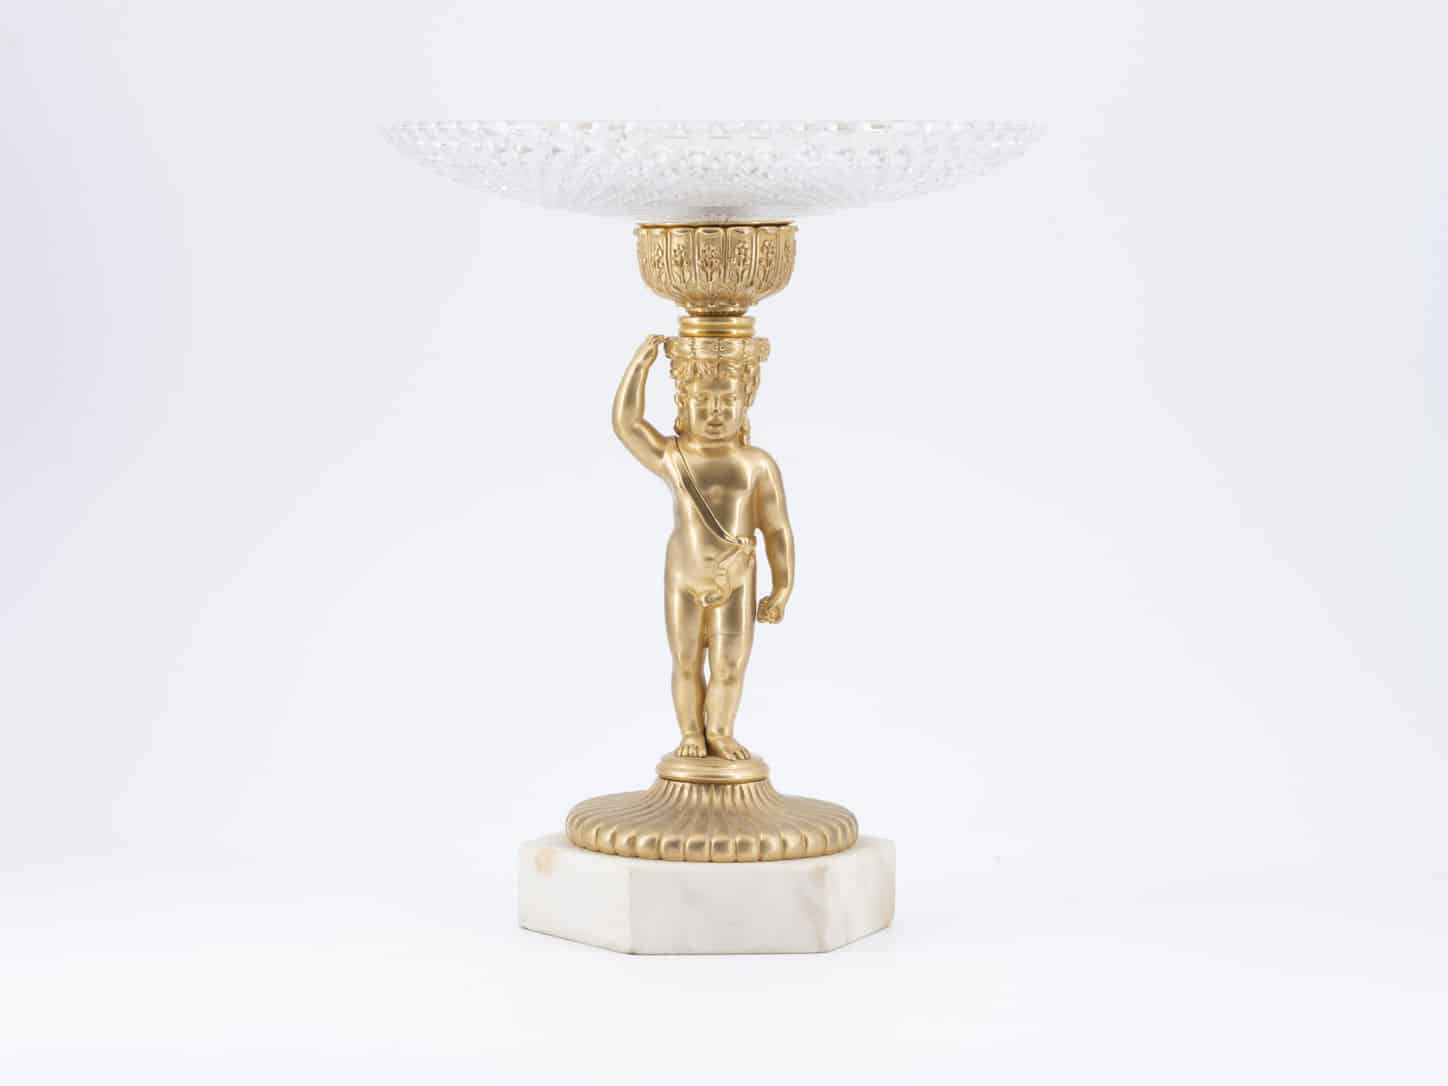 Bronze and Crystal Cup on a white Marble Base, 19th Century